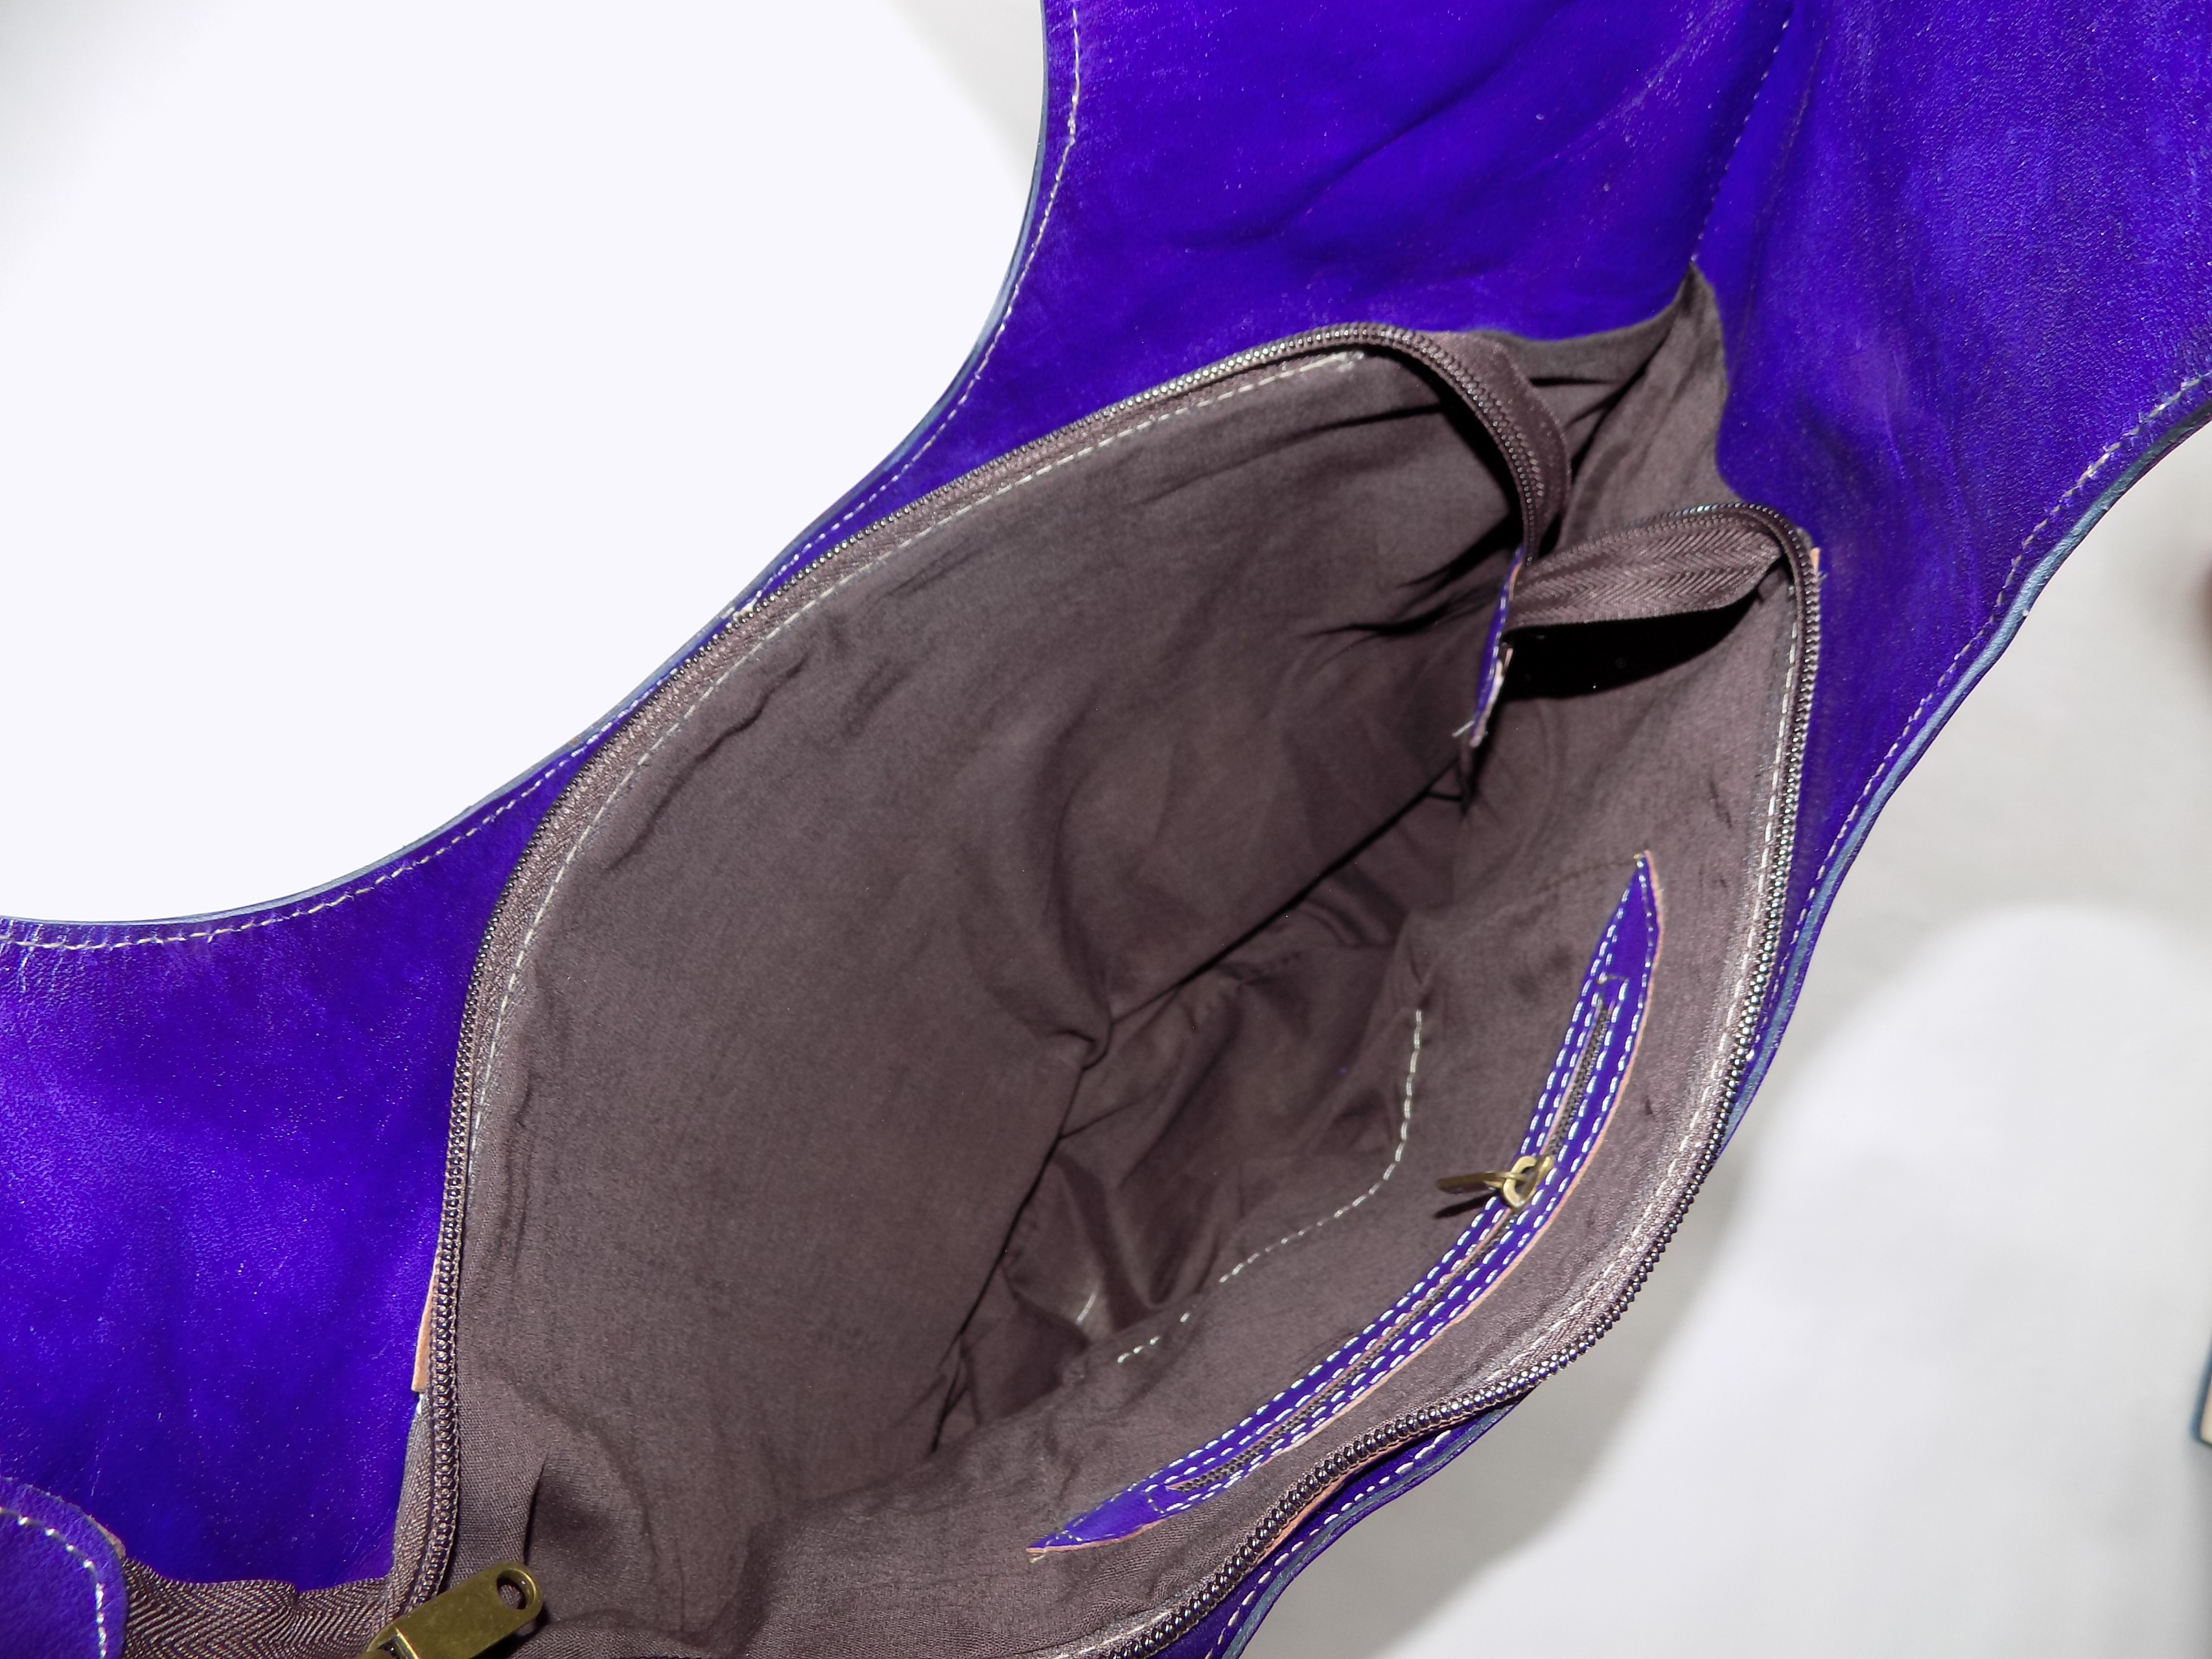 PURPLE LEATHER - EXTRA LARGE - shoulder or tote bags